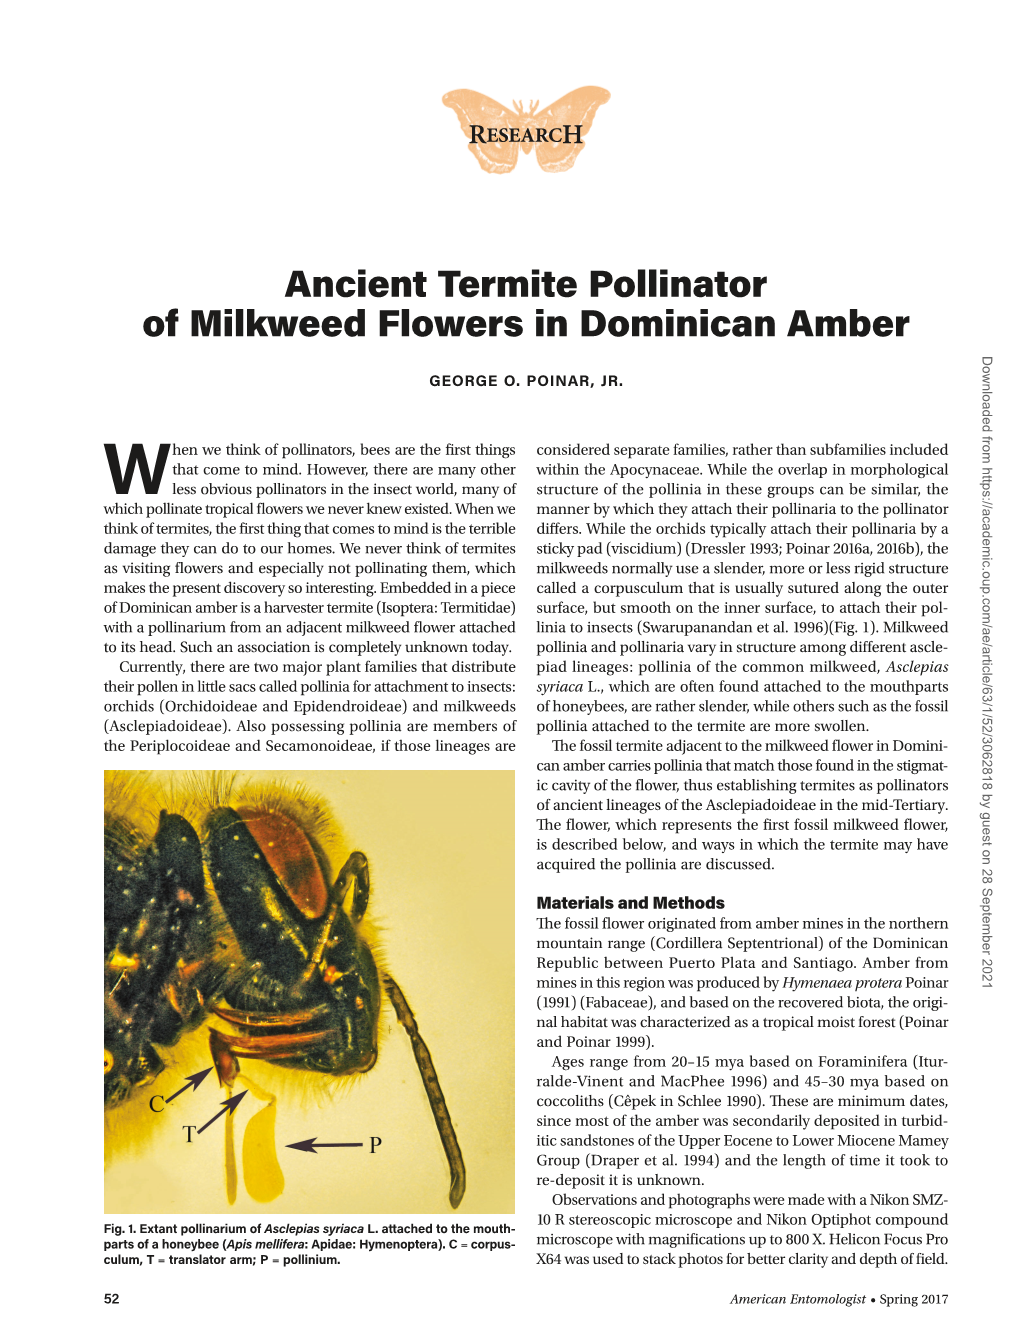 Ancient Termite Pollinator of Milkweed Flowers in Dominican Amber Downloaded from by Guest on 28 September 2021